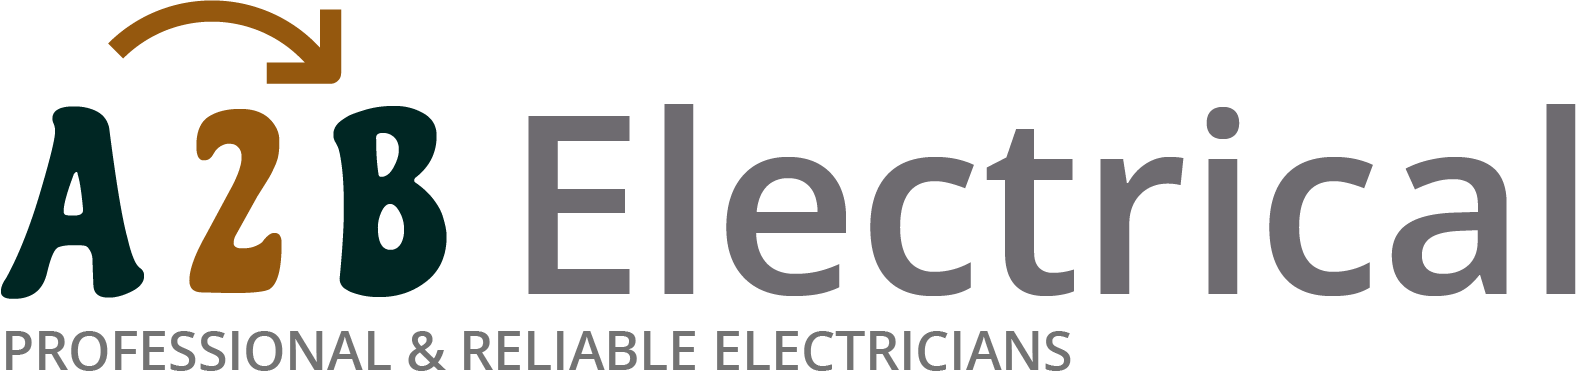 If you have electrical wiring problems in Billericay, we can provide an electrician to have a look for you. 